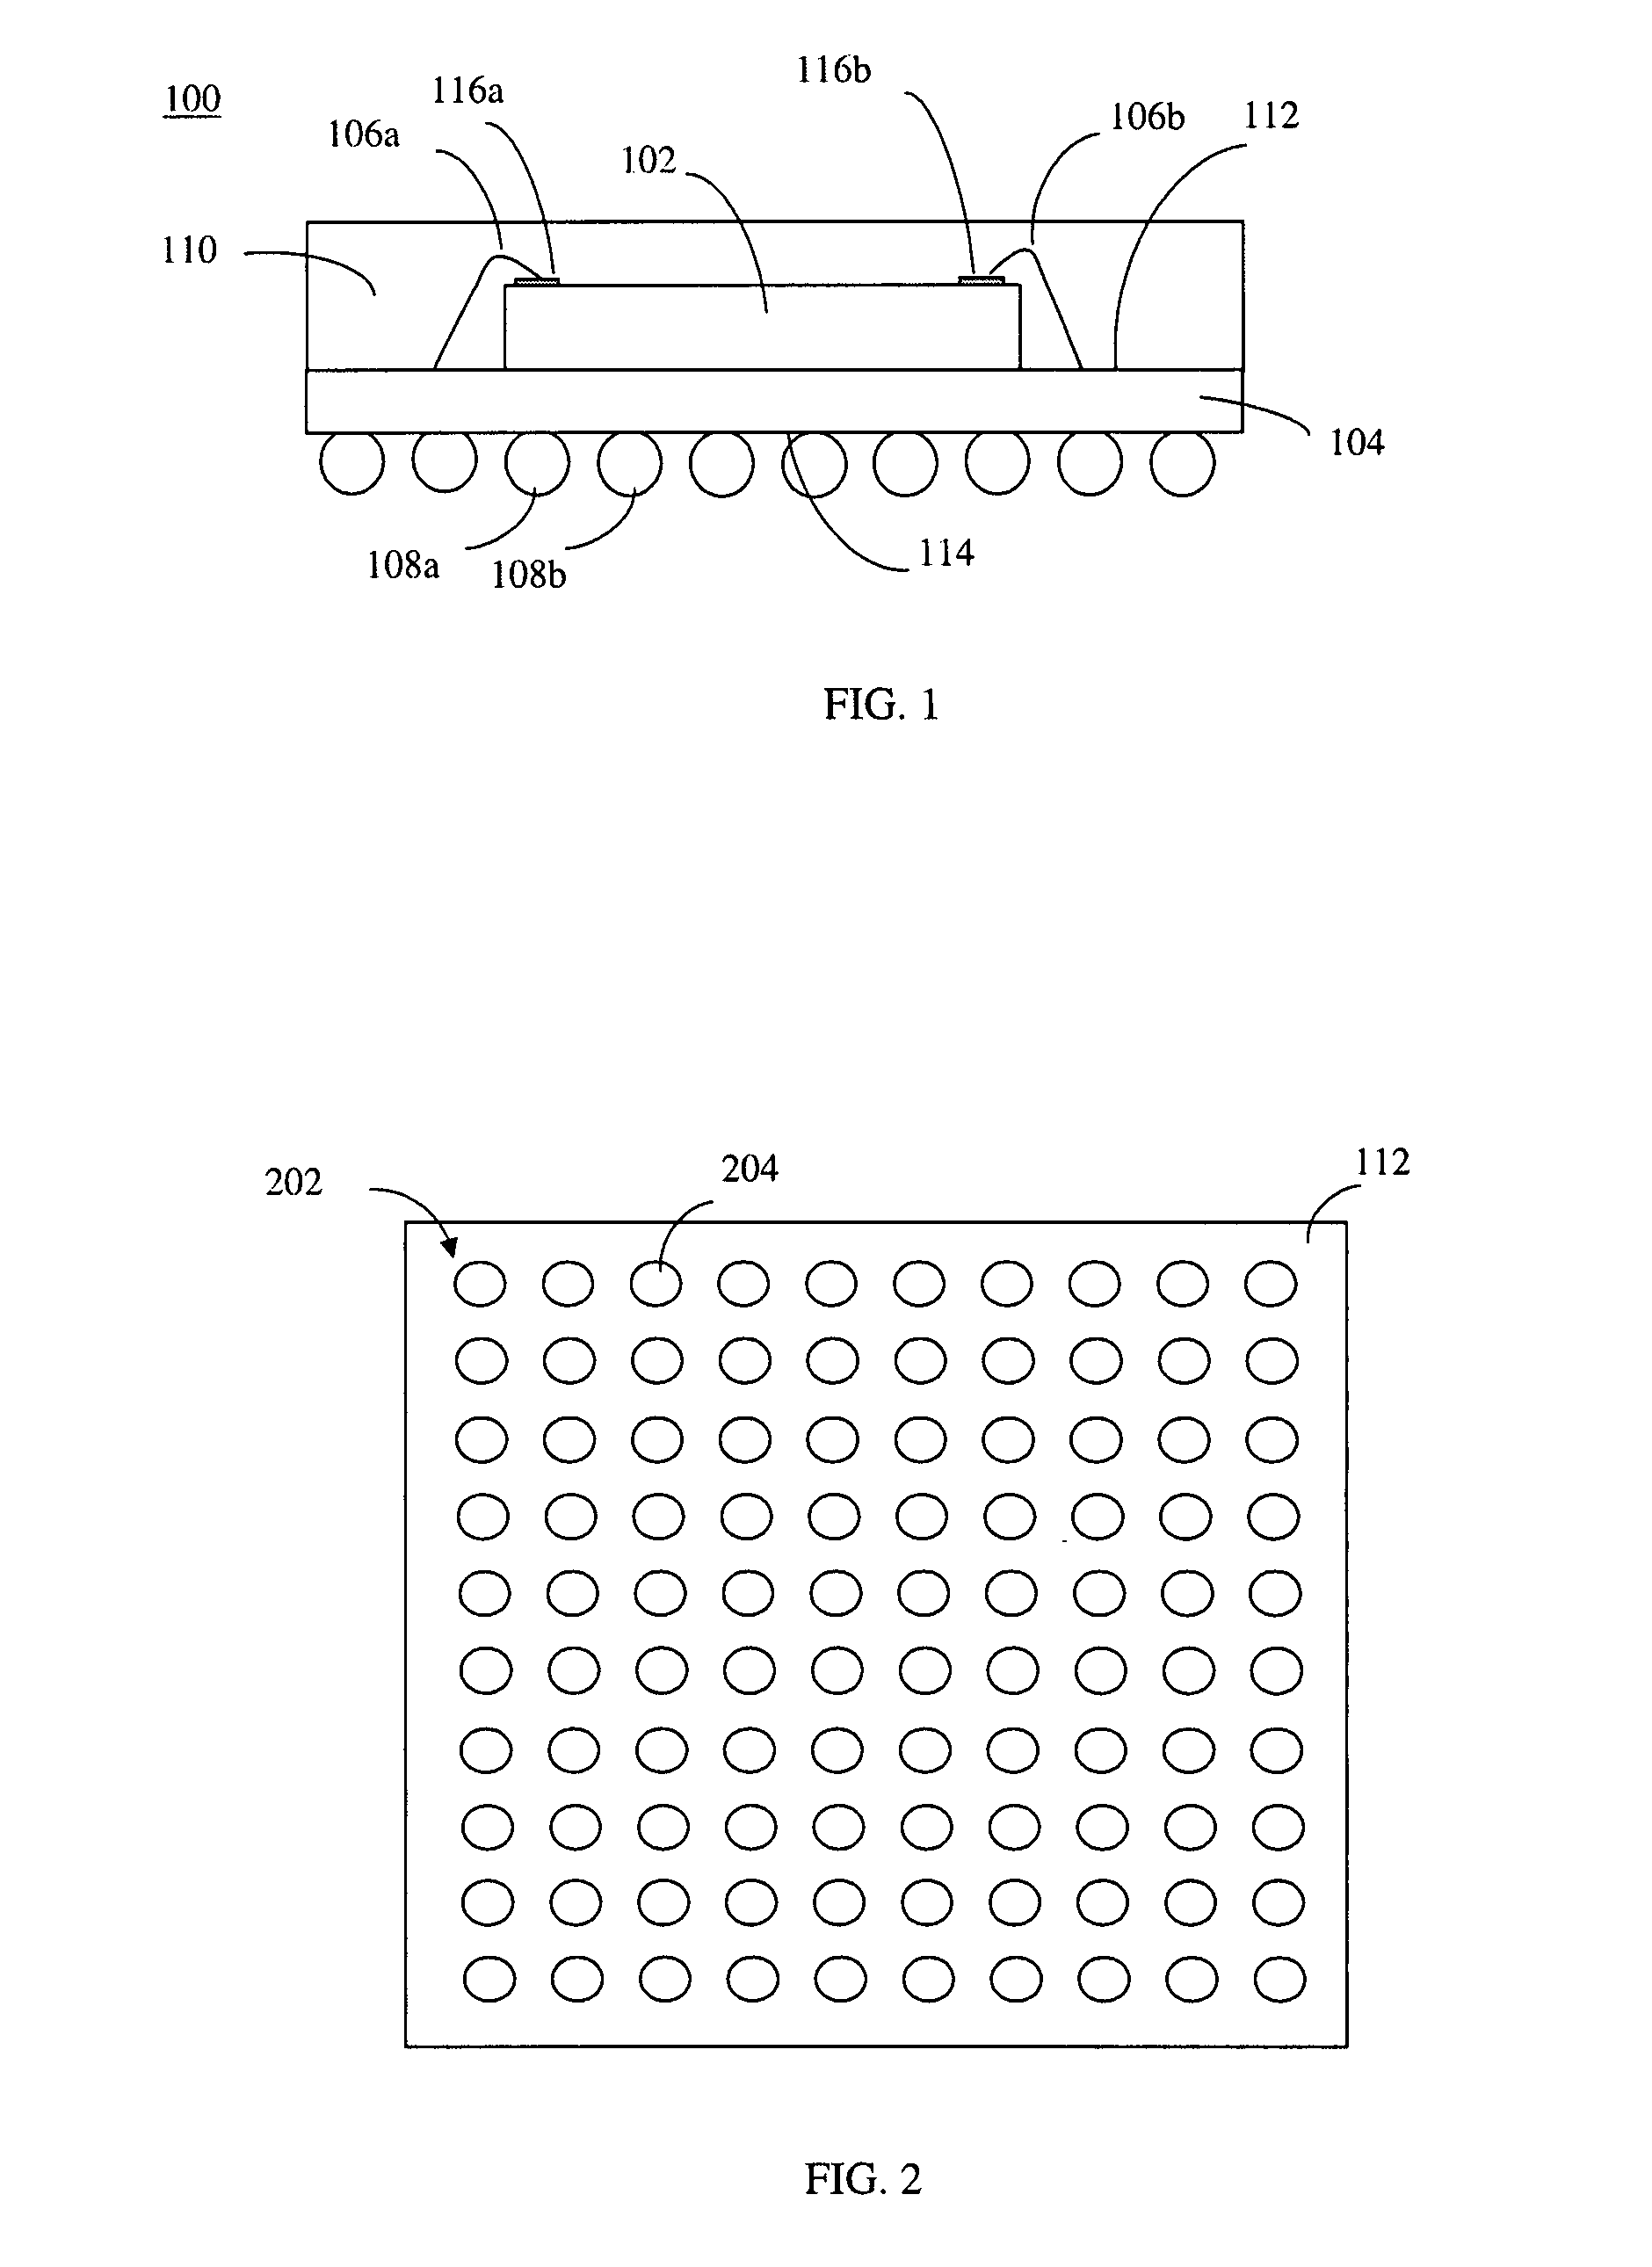 Oblong peripheral solder ball pads on a printed circuit board for mounting a ball grid array package